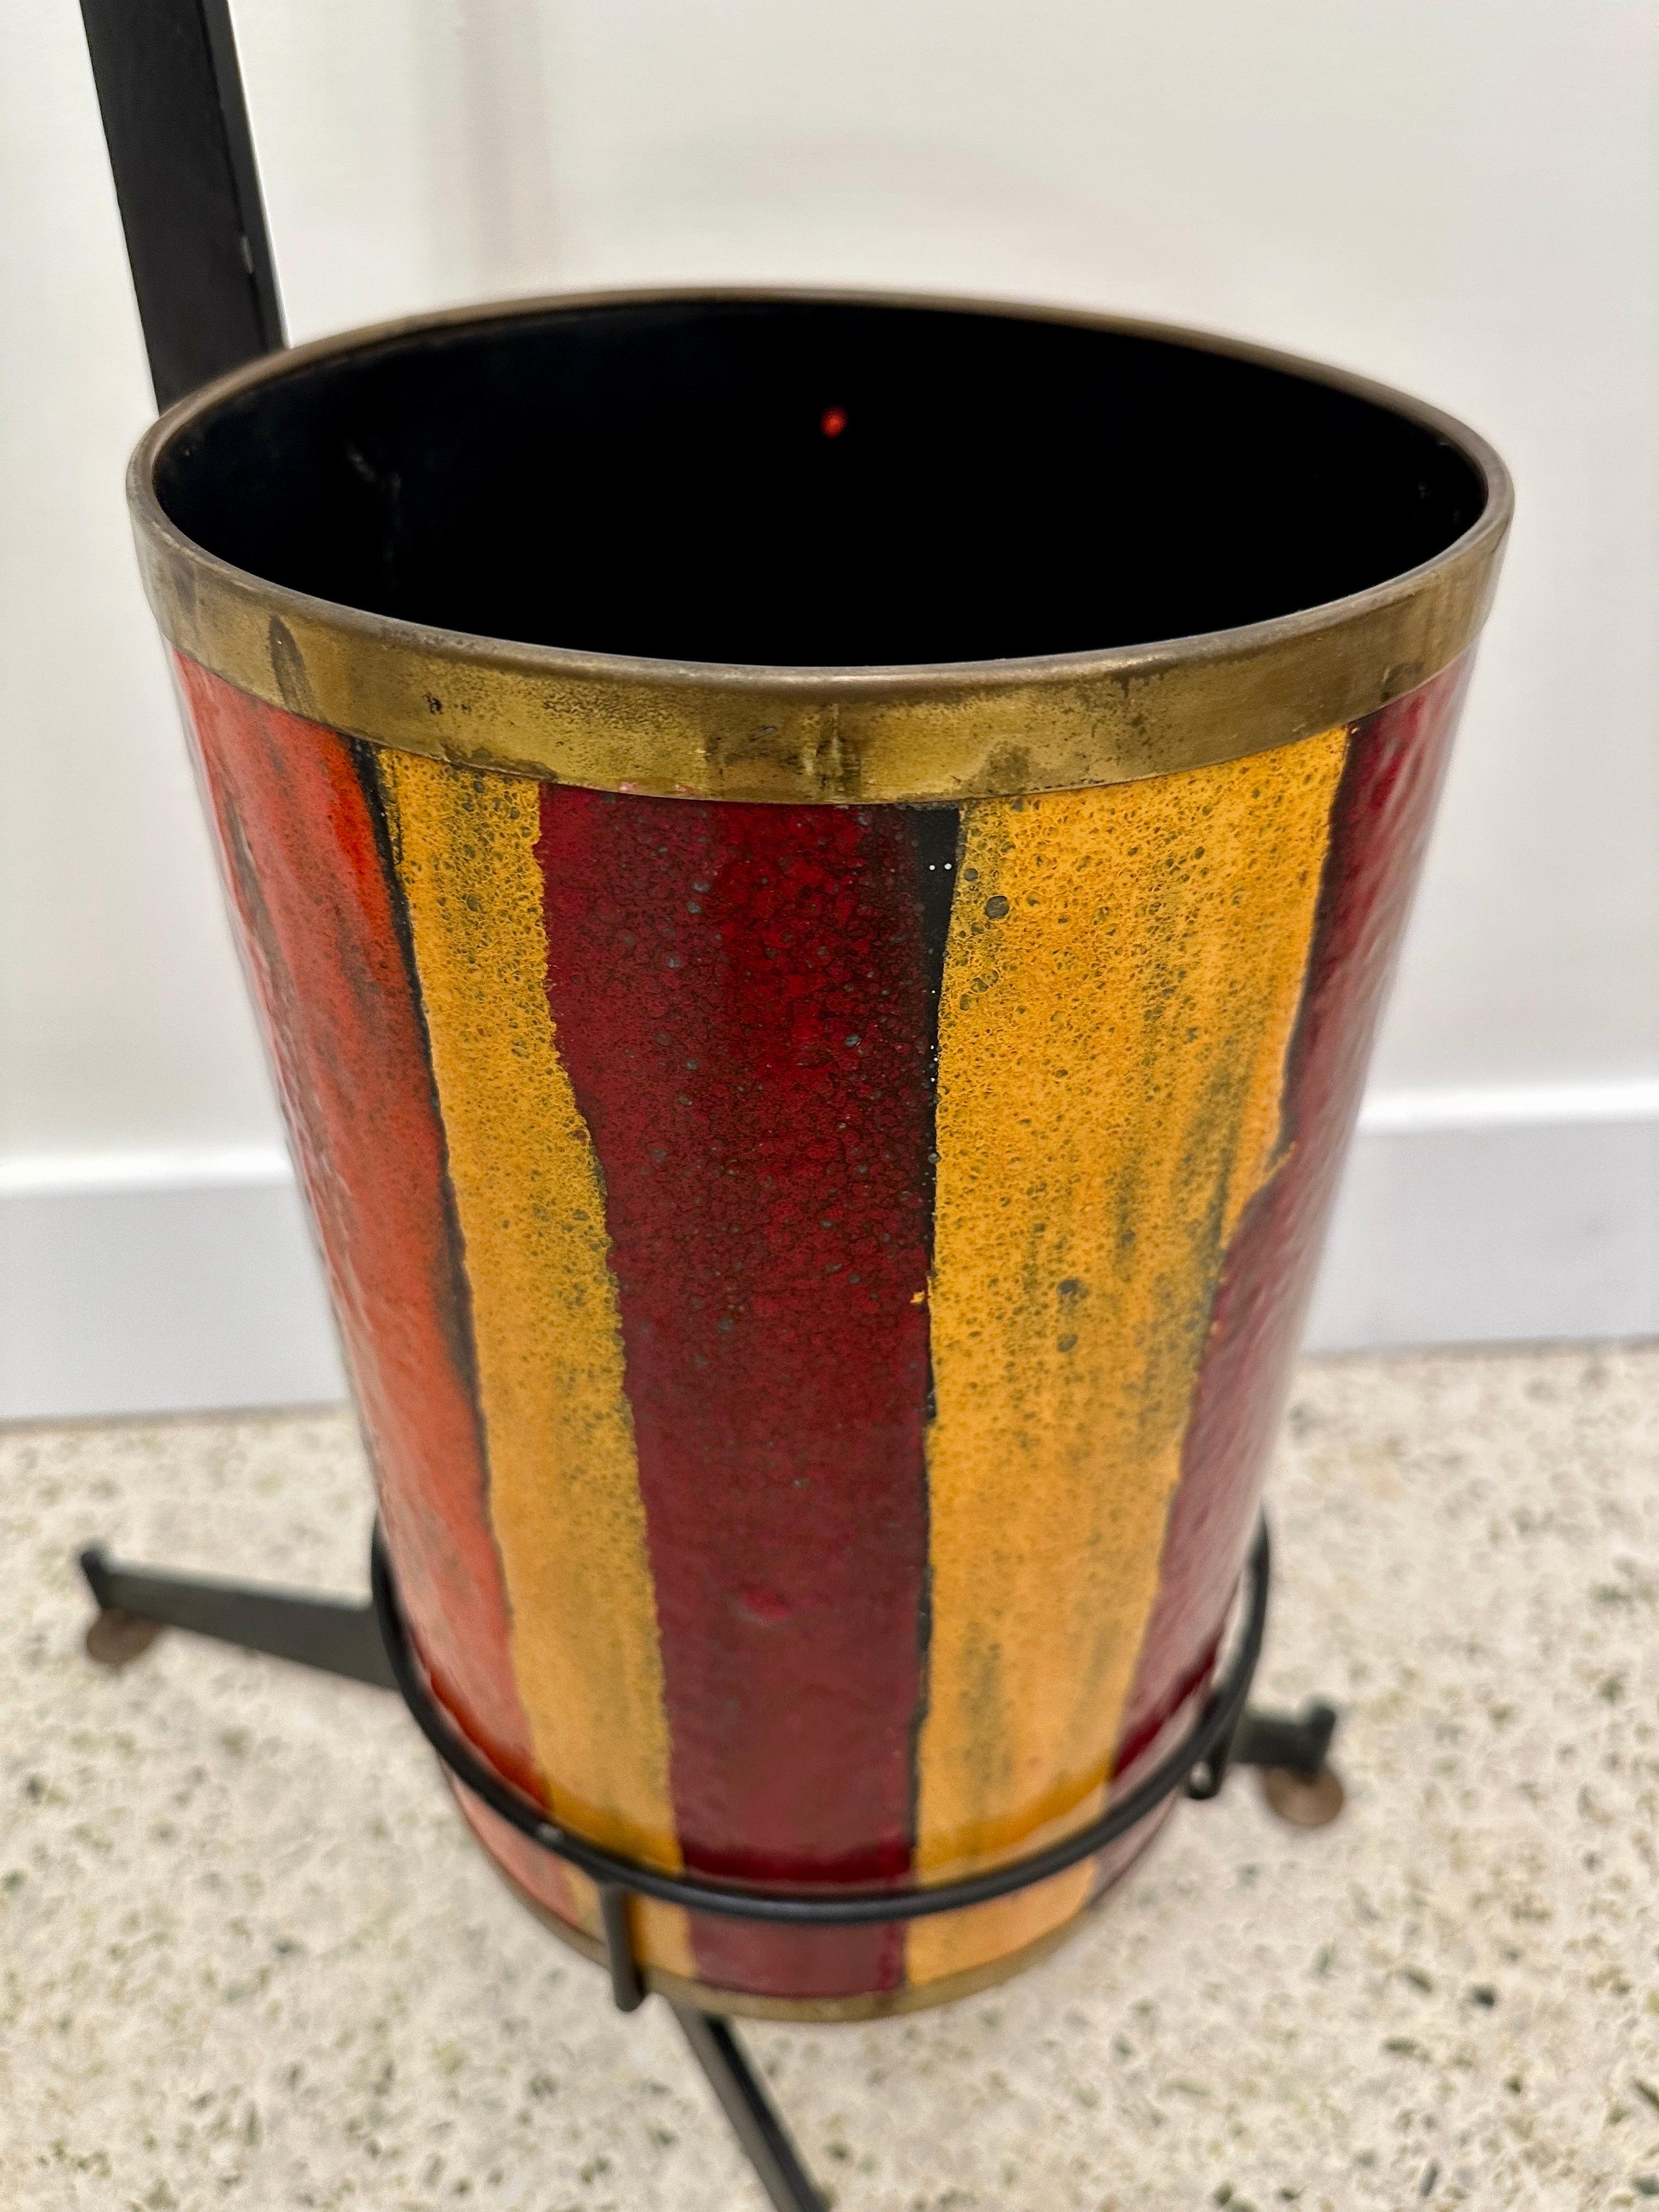 We LOVE this vividly colored enamel umbrella stand which sits in a very chic black iron stand with handle for easy movement.  The bucket is removeable and enameled in rich colors (yellow, burgundy and yellow) - ALL trimmed with a patinated brass